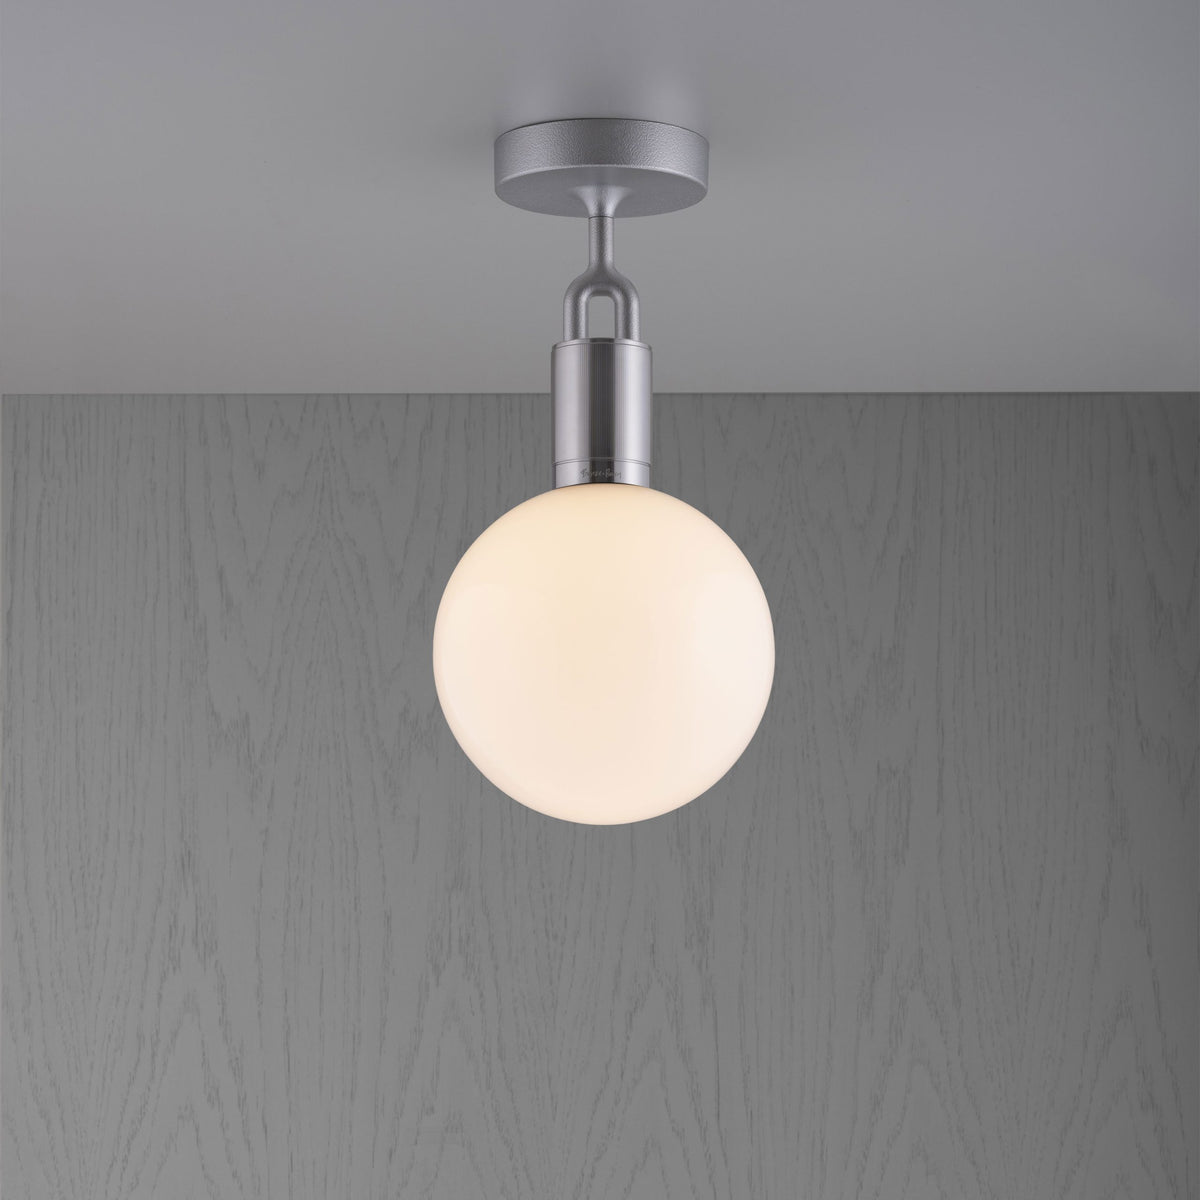 Buster + Punch - NFC-843215 - Forked Ceiling - Globe  - Forked - Steel